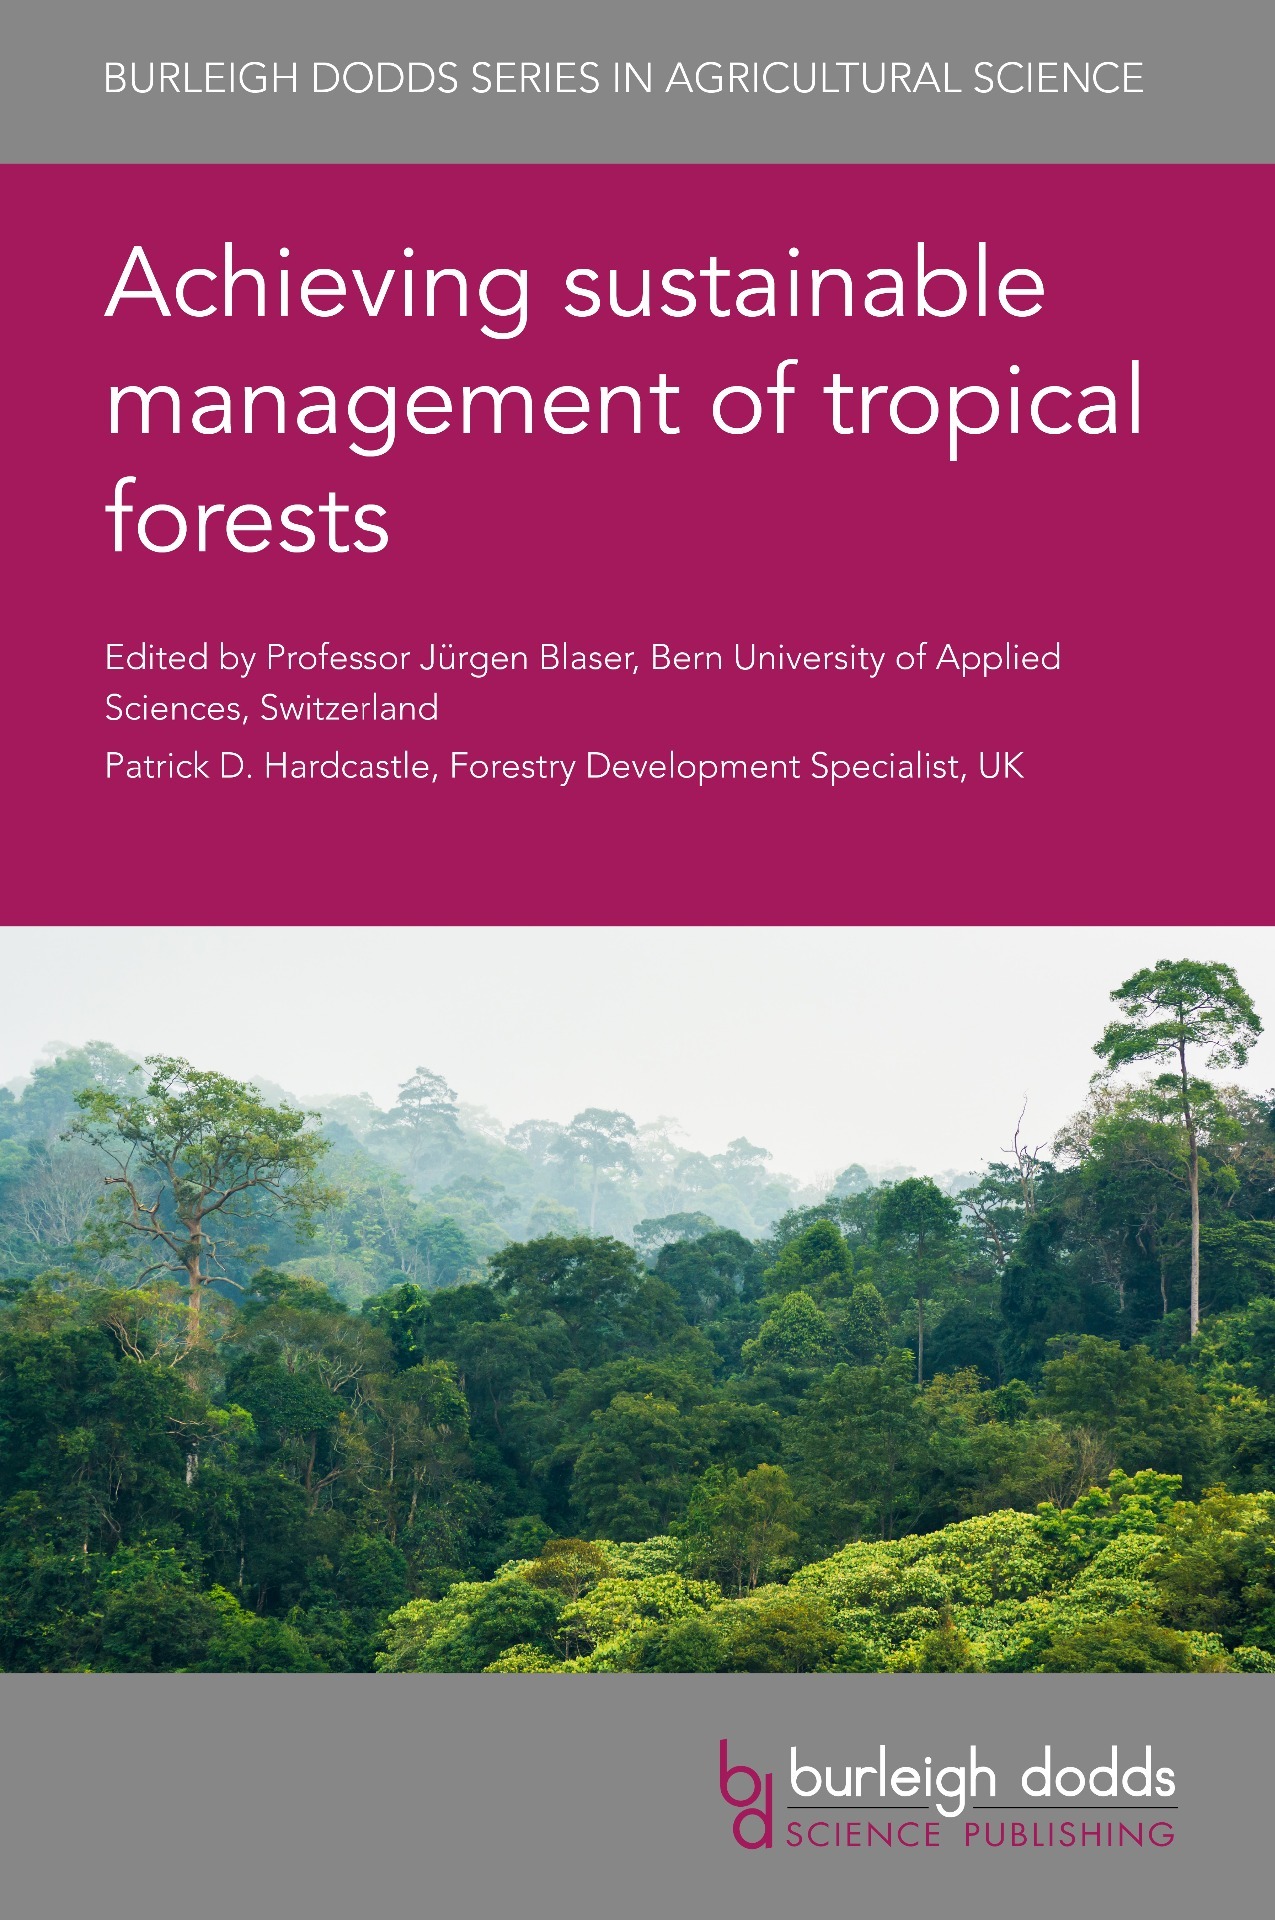 Achieving sustainable management of tropical forests